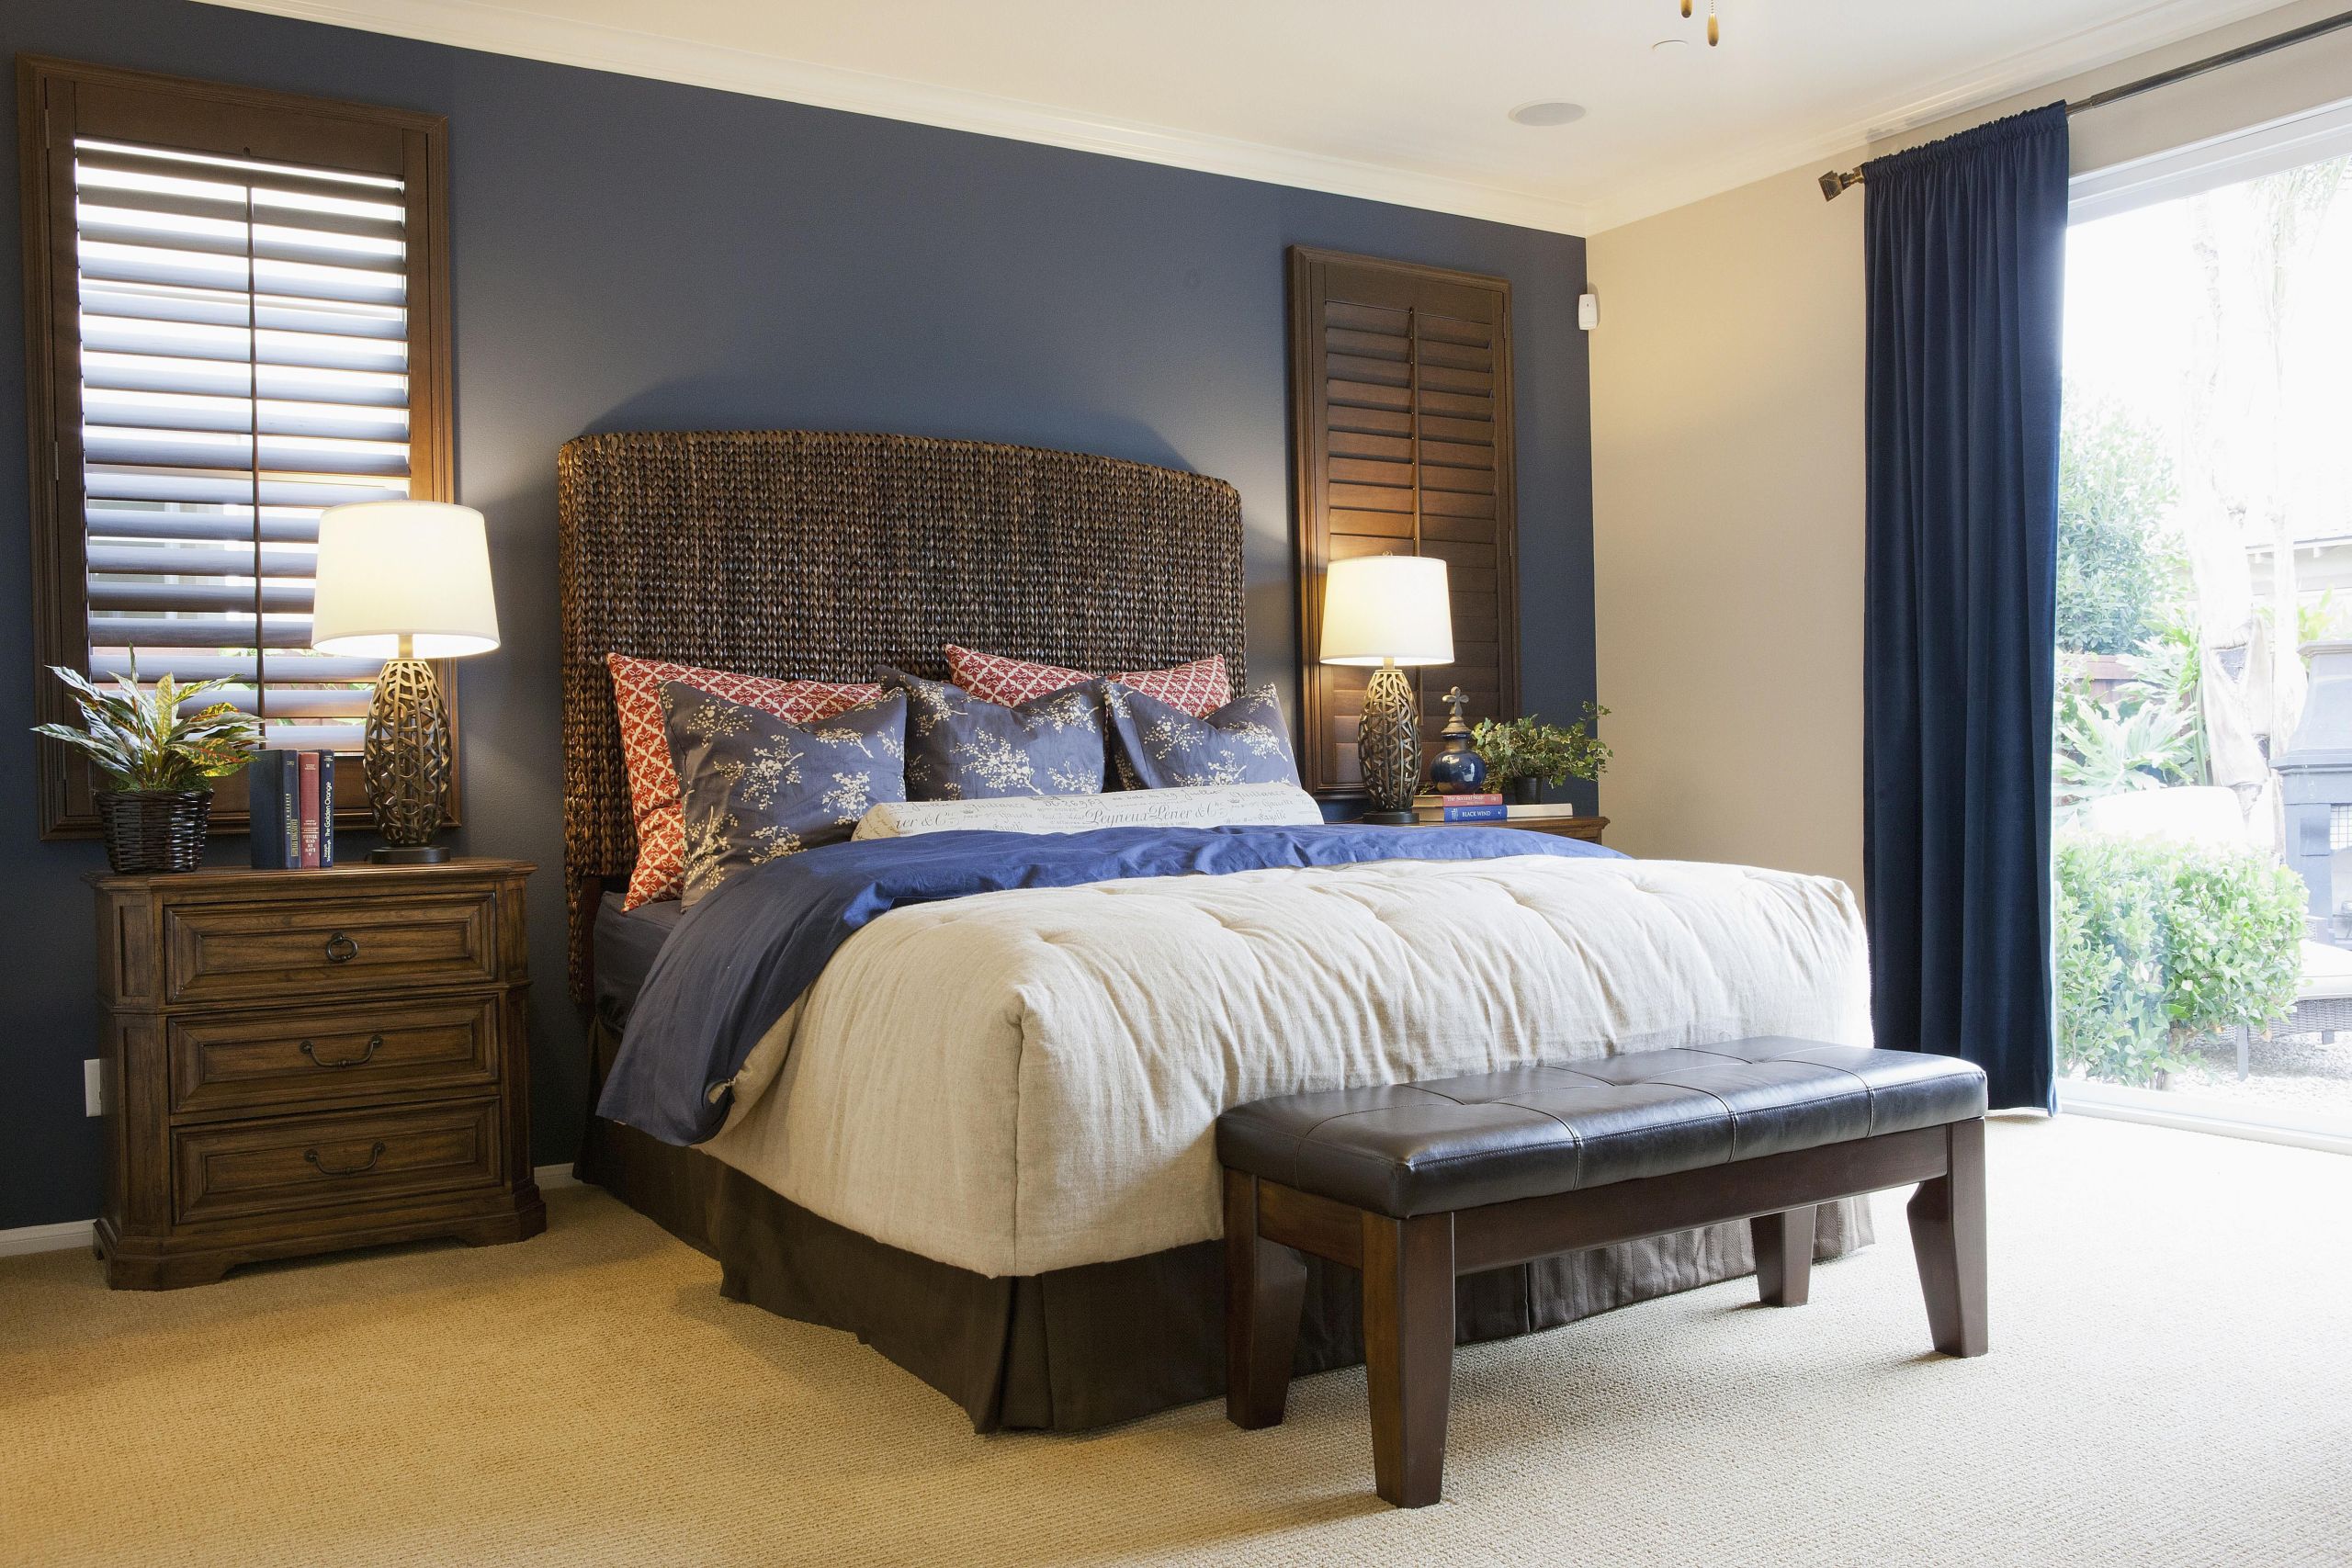 Accent Walls In Bedroom
 How to Choose an Accent Wall and Color in a Bedroom